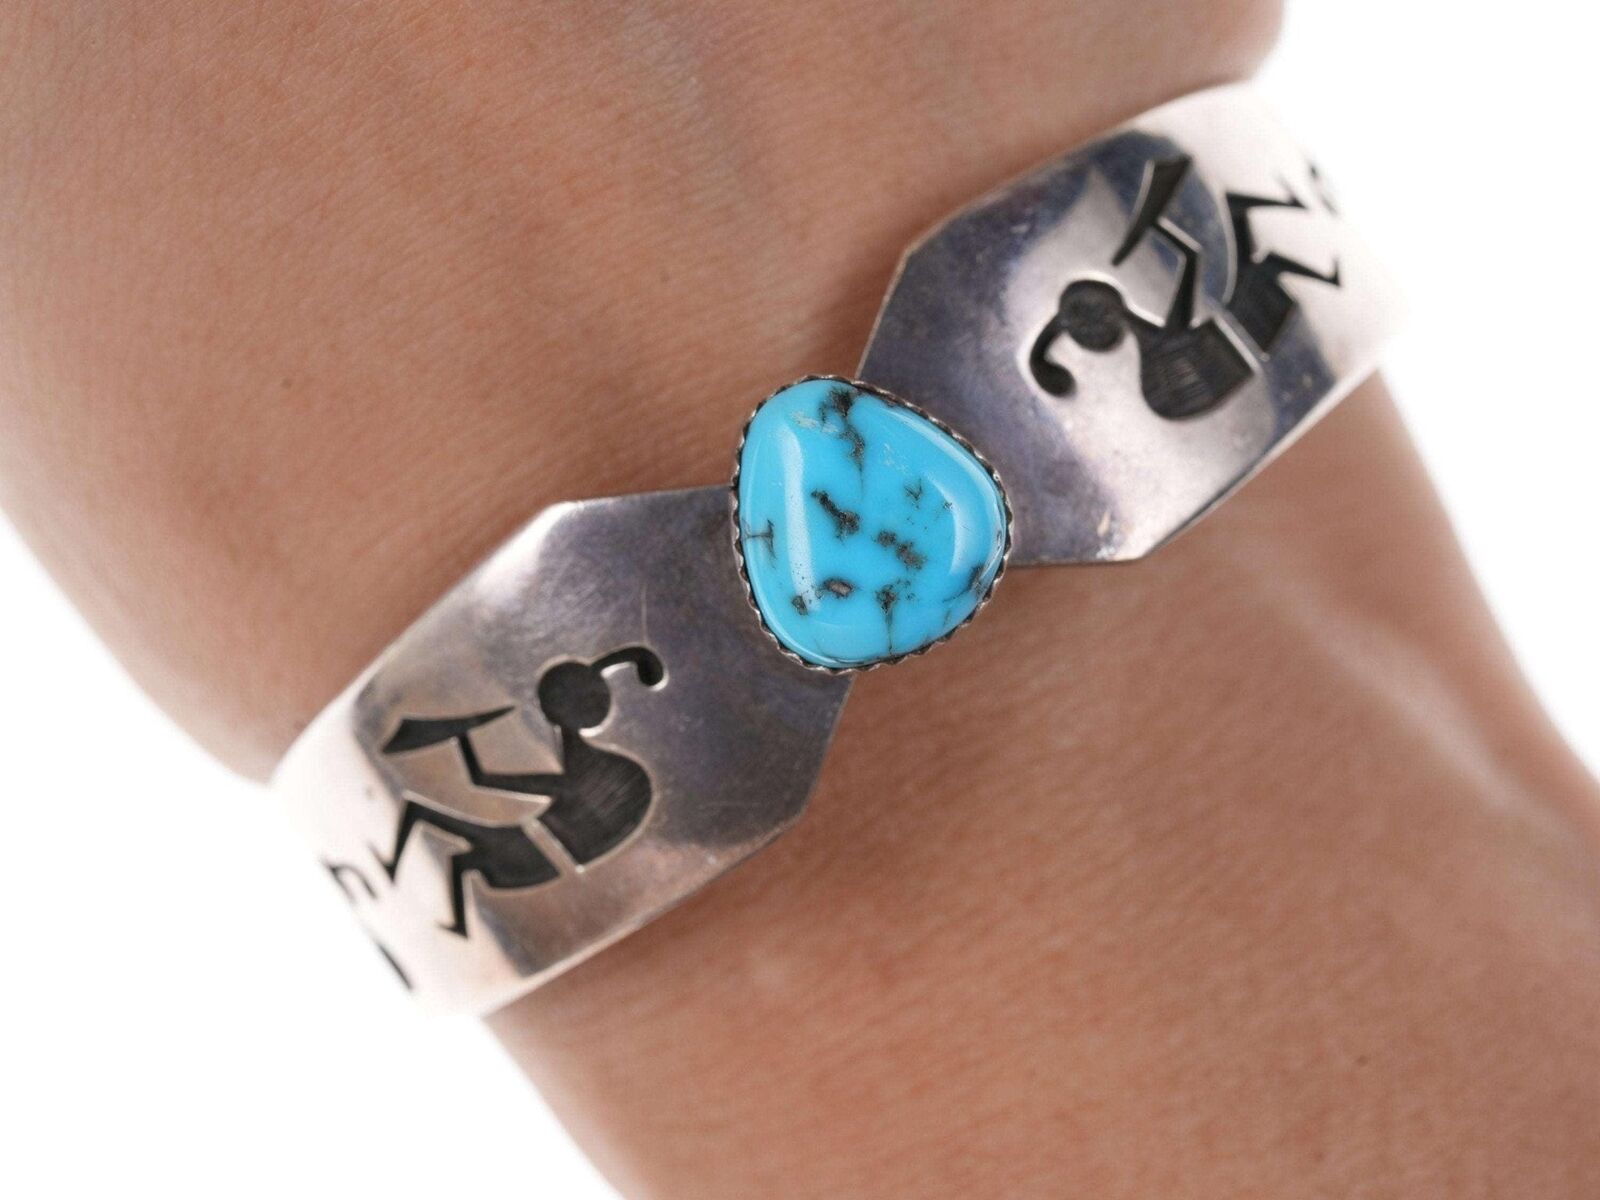 Hopi Sterling silver overlay style cuff bracelet with turquoise